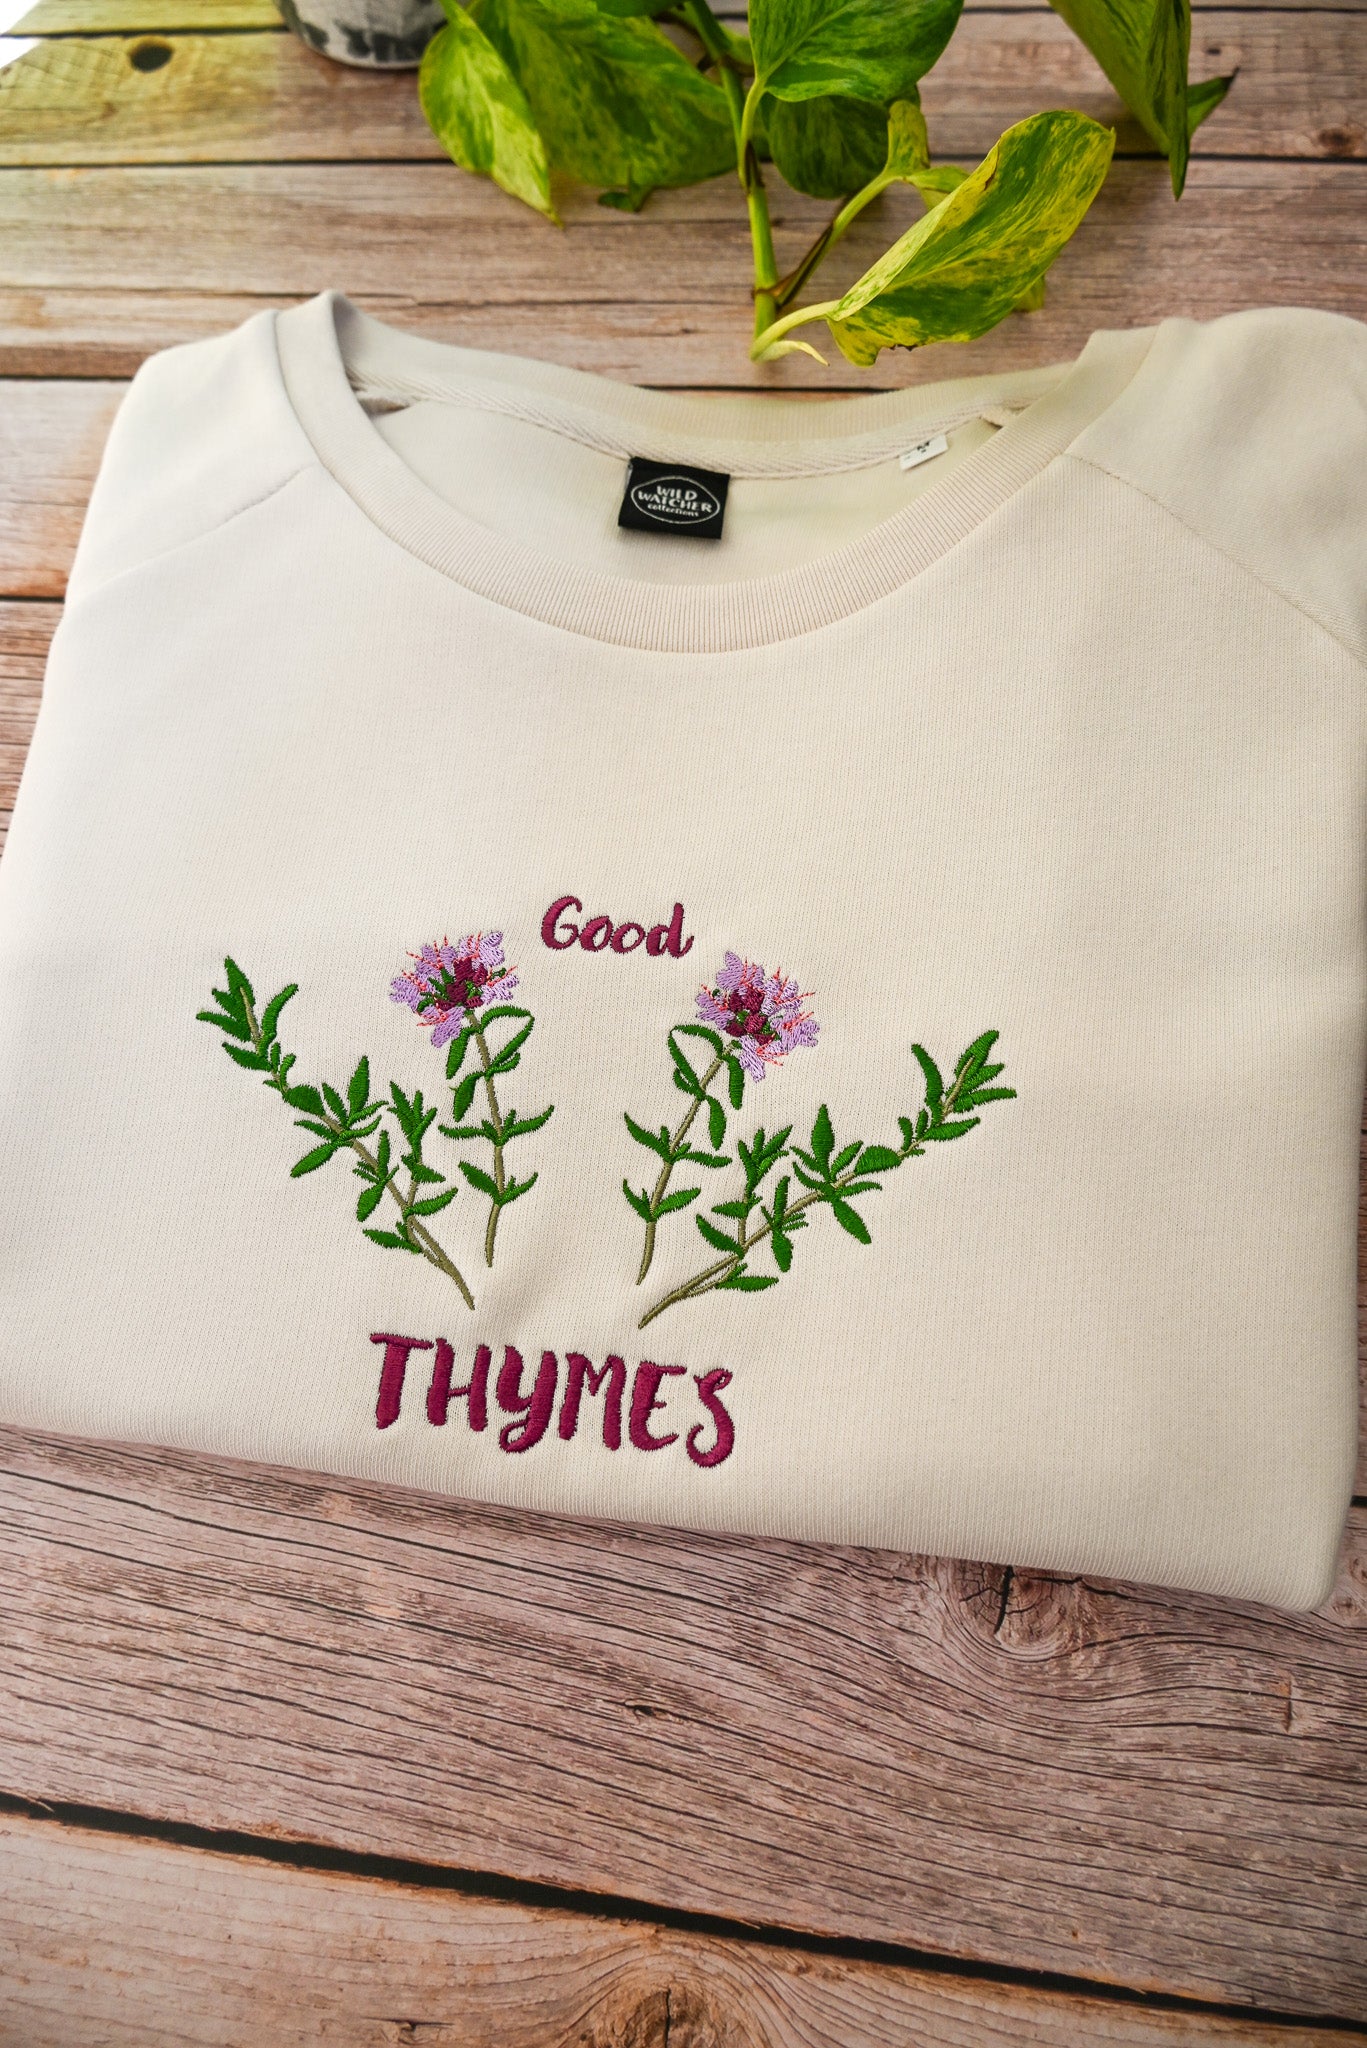 Good Thymes Organic Ladies Fitted Relaxed Sweatshirt